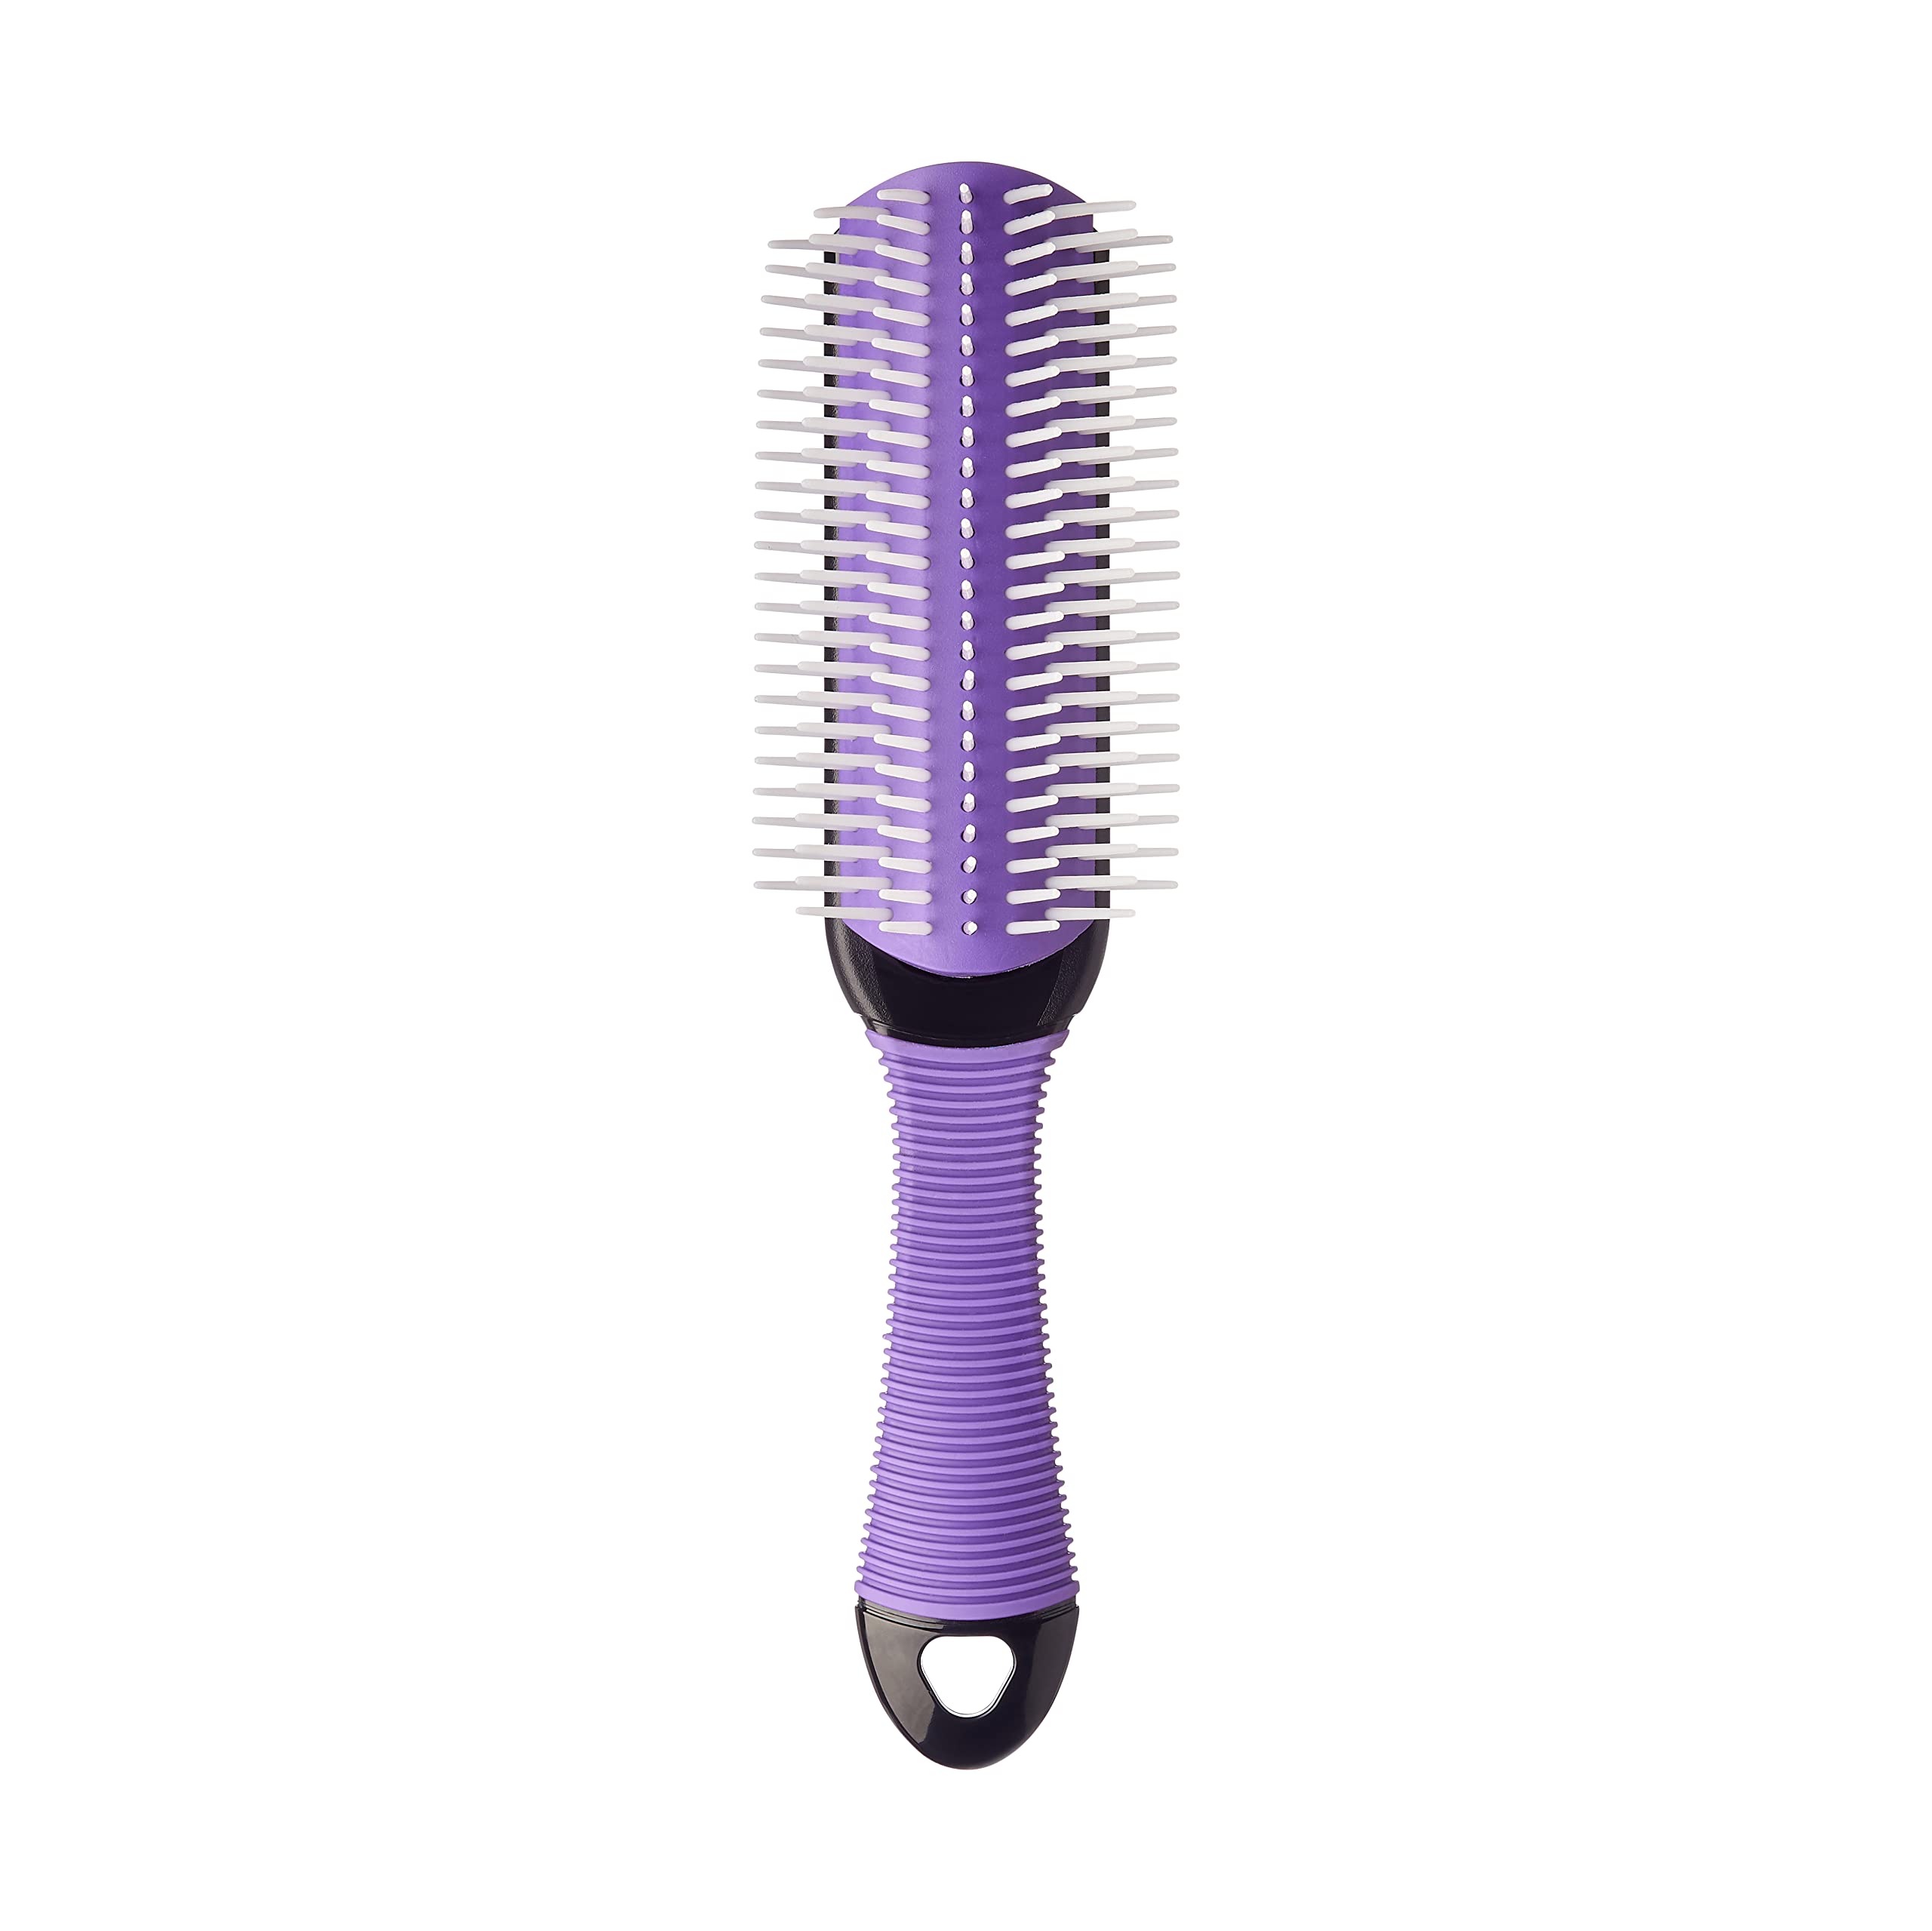 KISS Colors & Care 7 Row Non-Slip Detangling Hair Brush, Removable Cushion For Easy Cleaning, Slip-Proof Handle For Sturdy Grip , Detangles Seamlessly Without Pulling or Tugging Hair, Suitable for All Hair Types